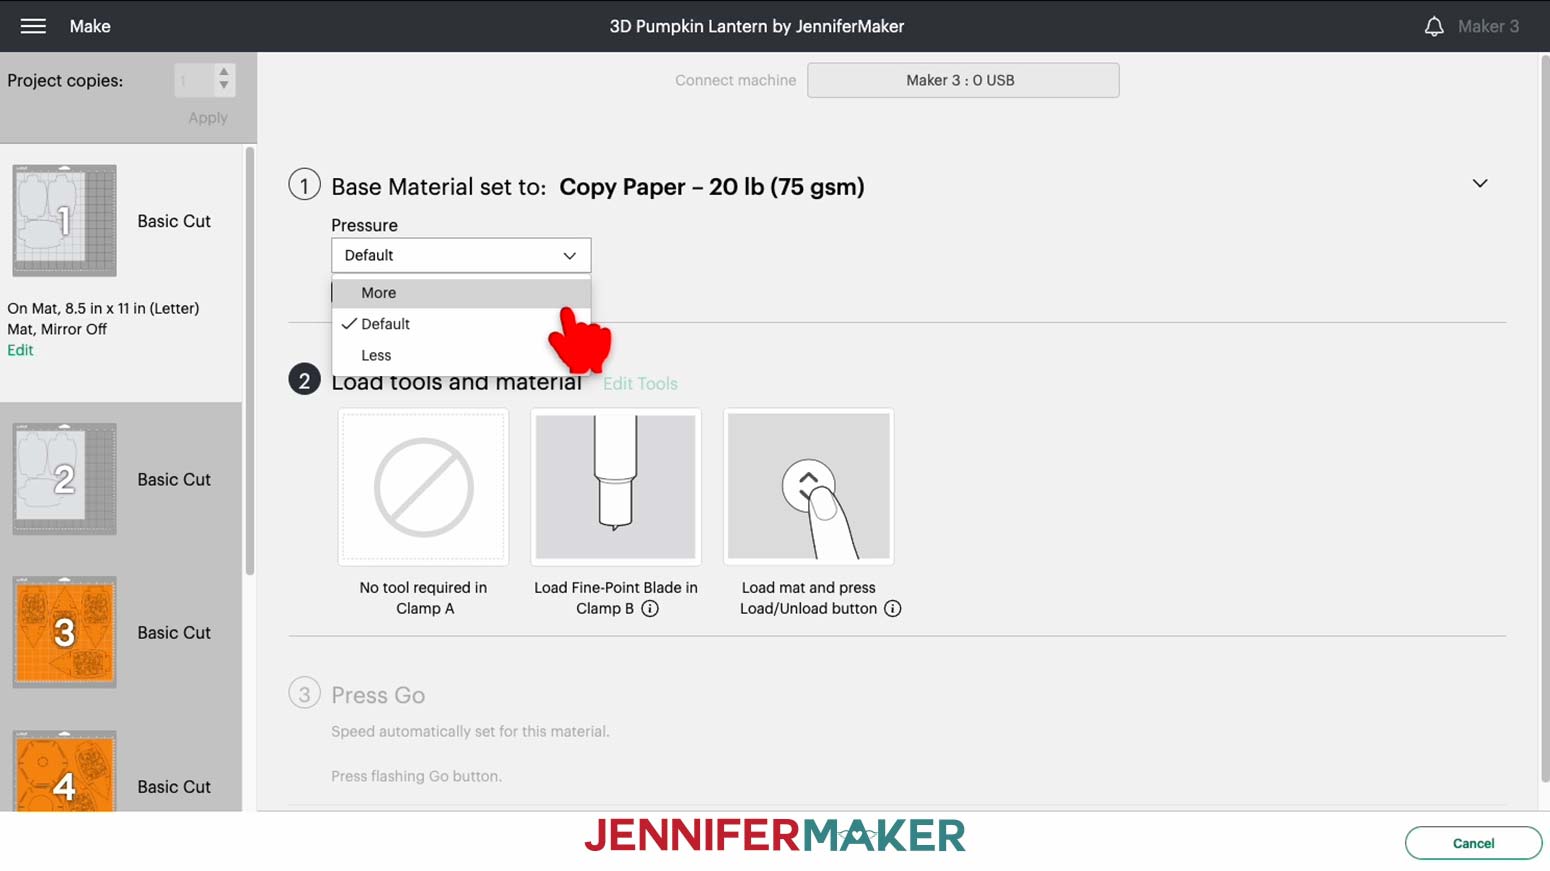 On the Make Screen in Design Space, choose the "Copy Paper - 20 lb" setting with More Pressure for the 3D pumpkin lantern copy paper diffuser panels